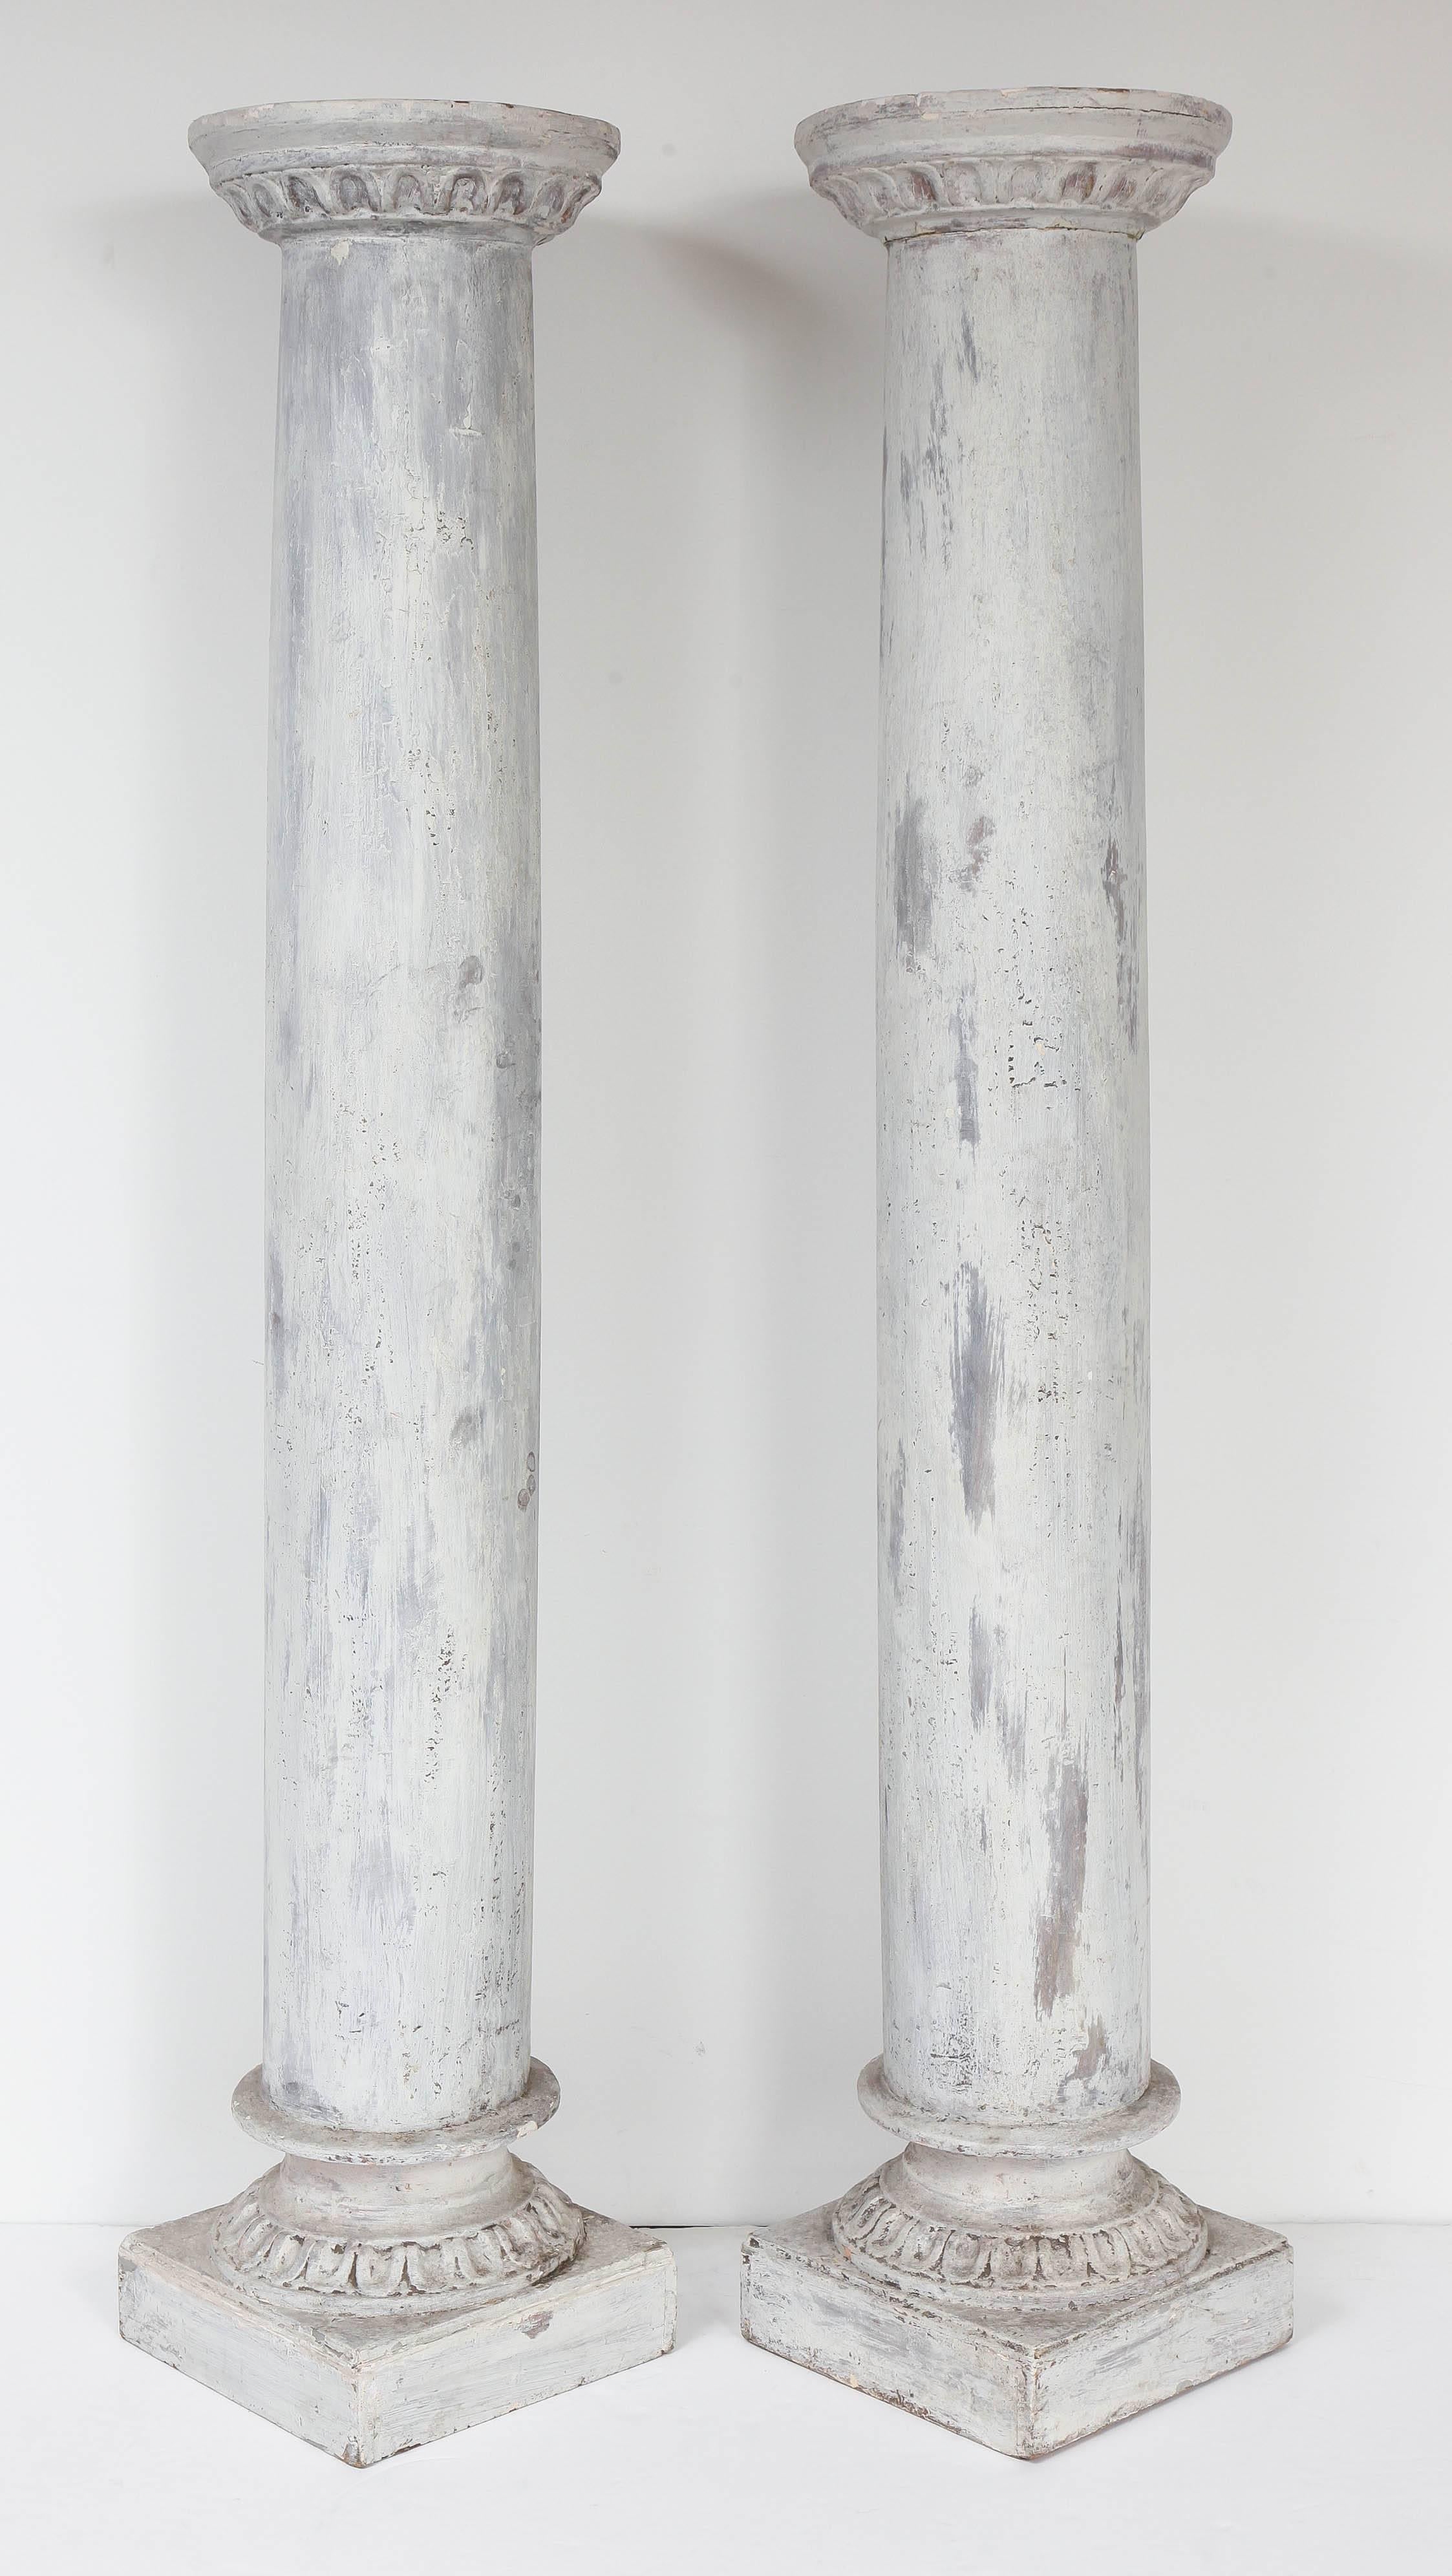 Wood Pair of Architectural Columns